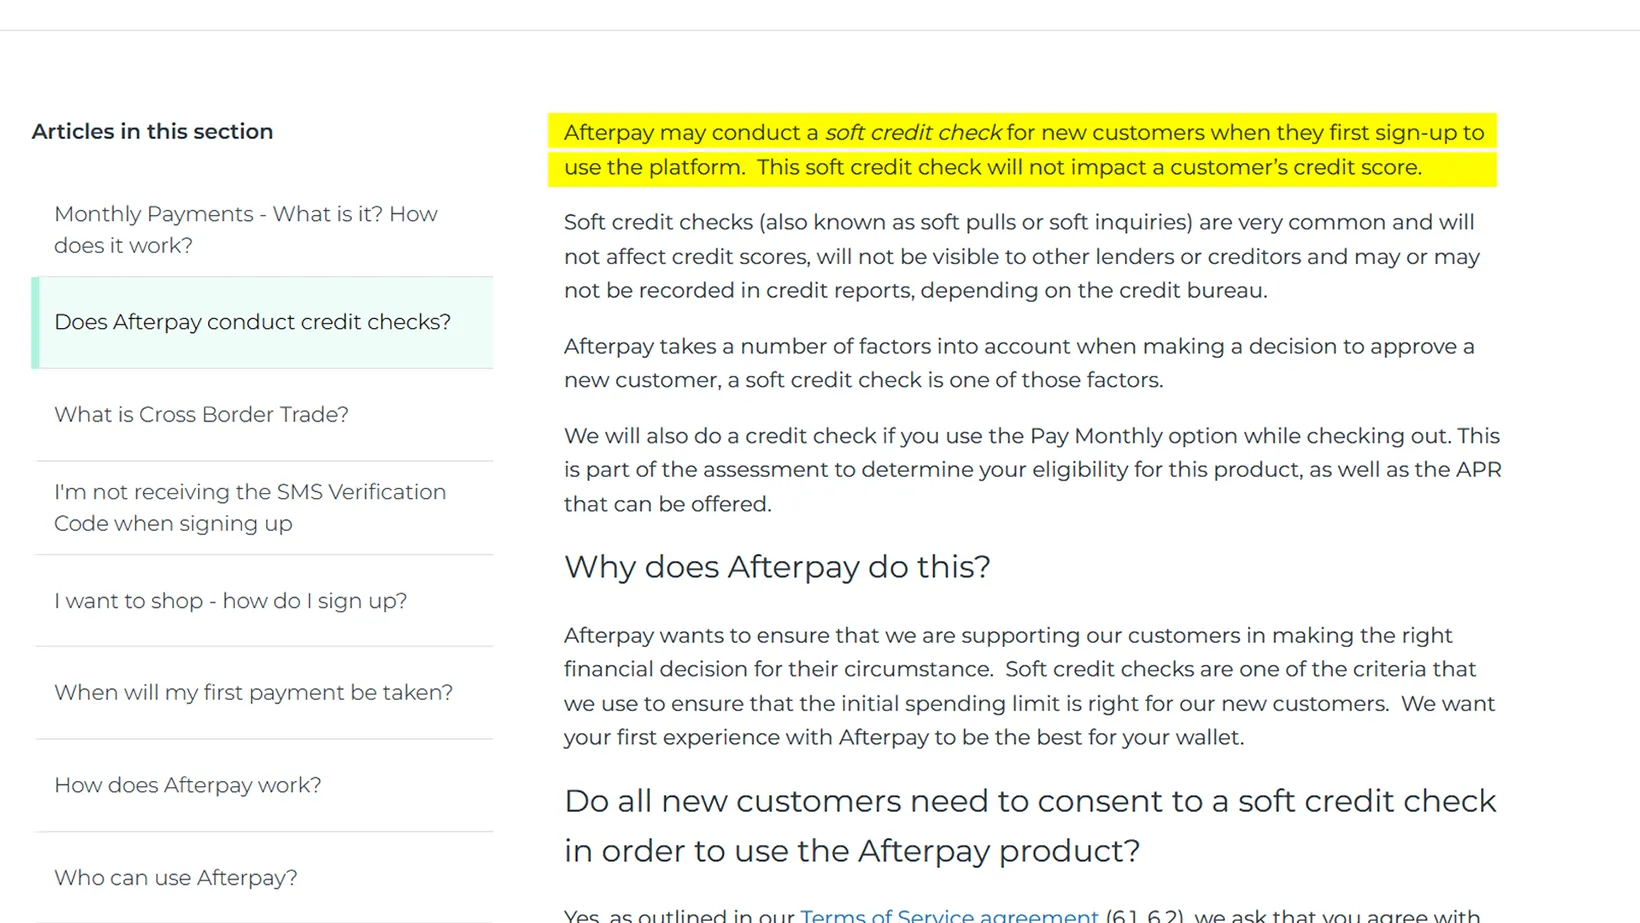 Afterpay on Credit Checks